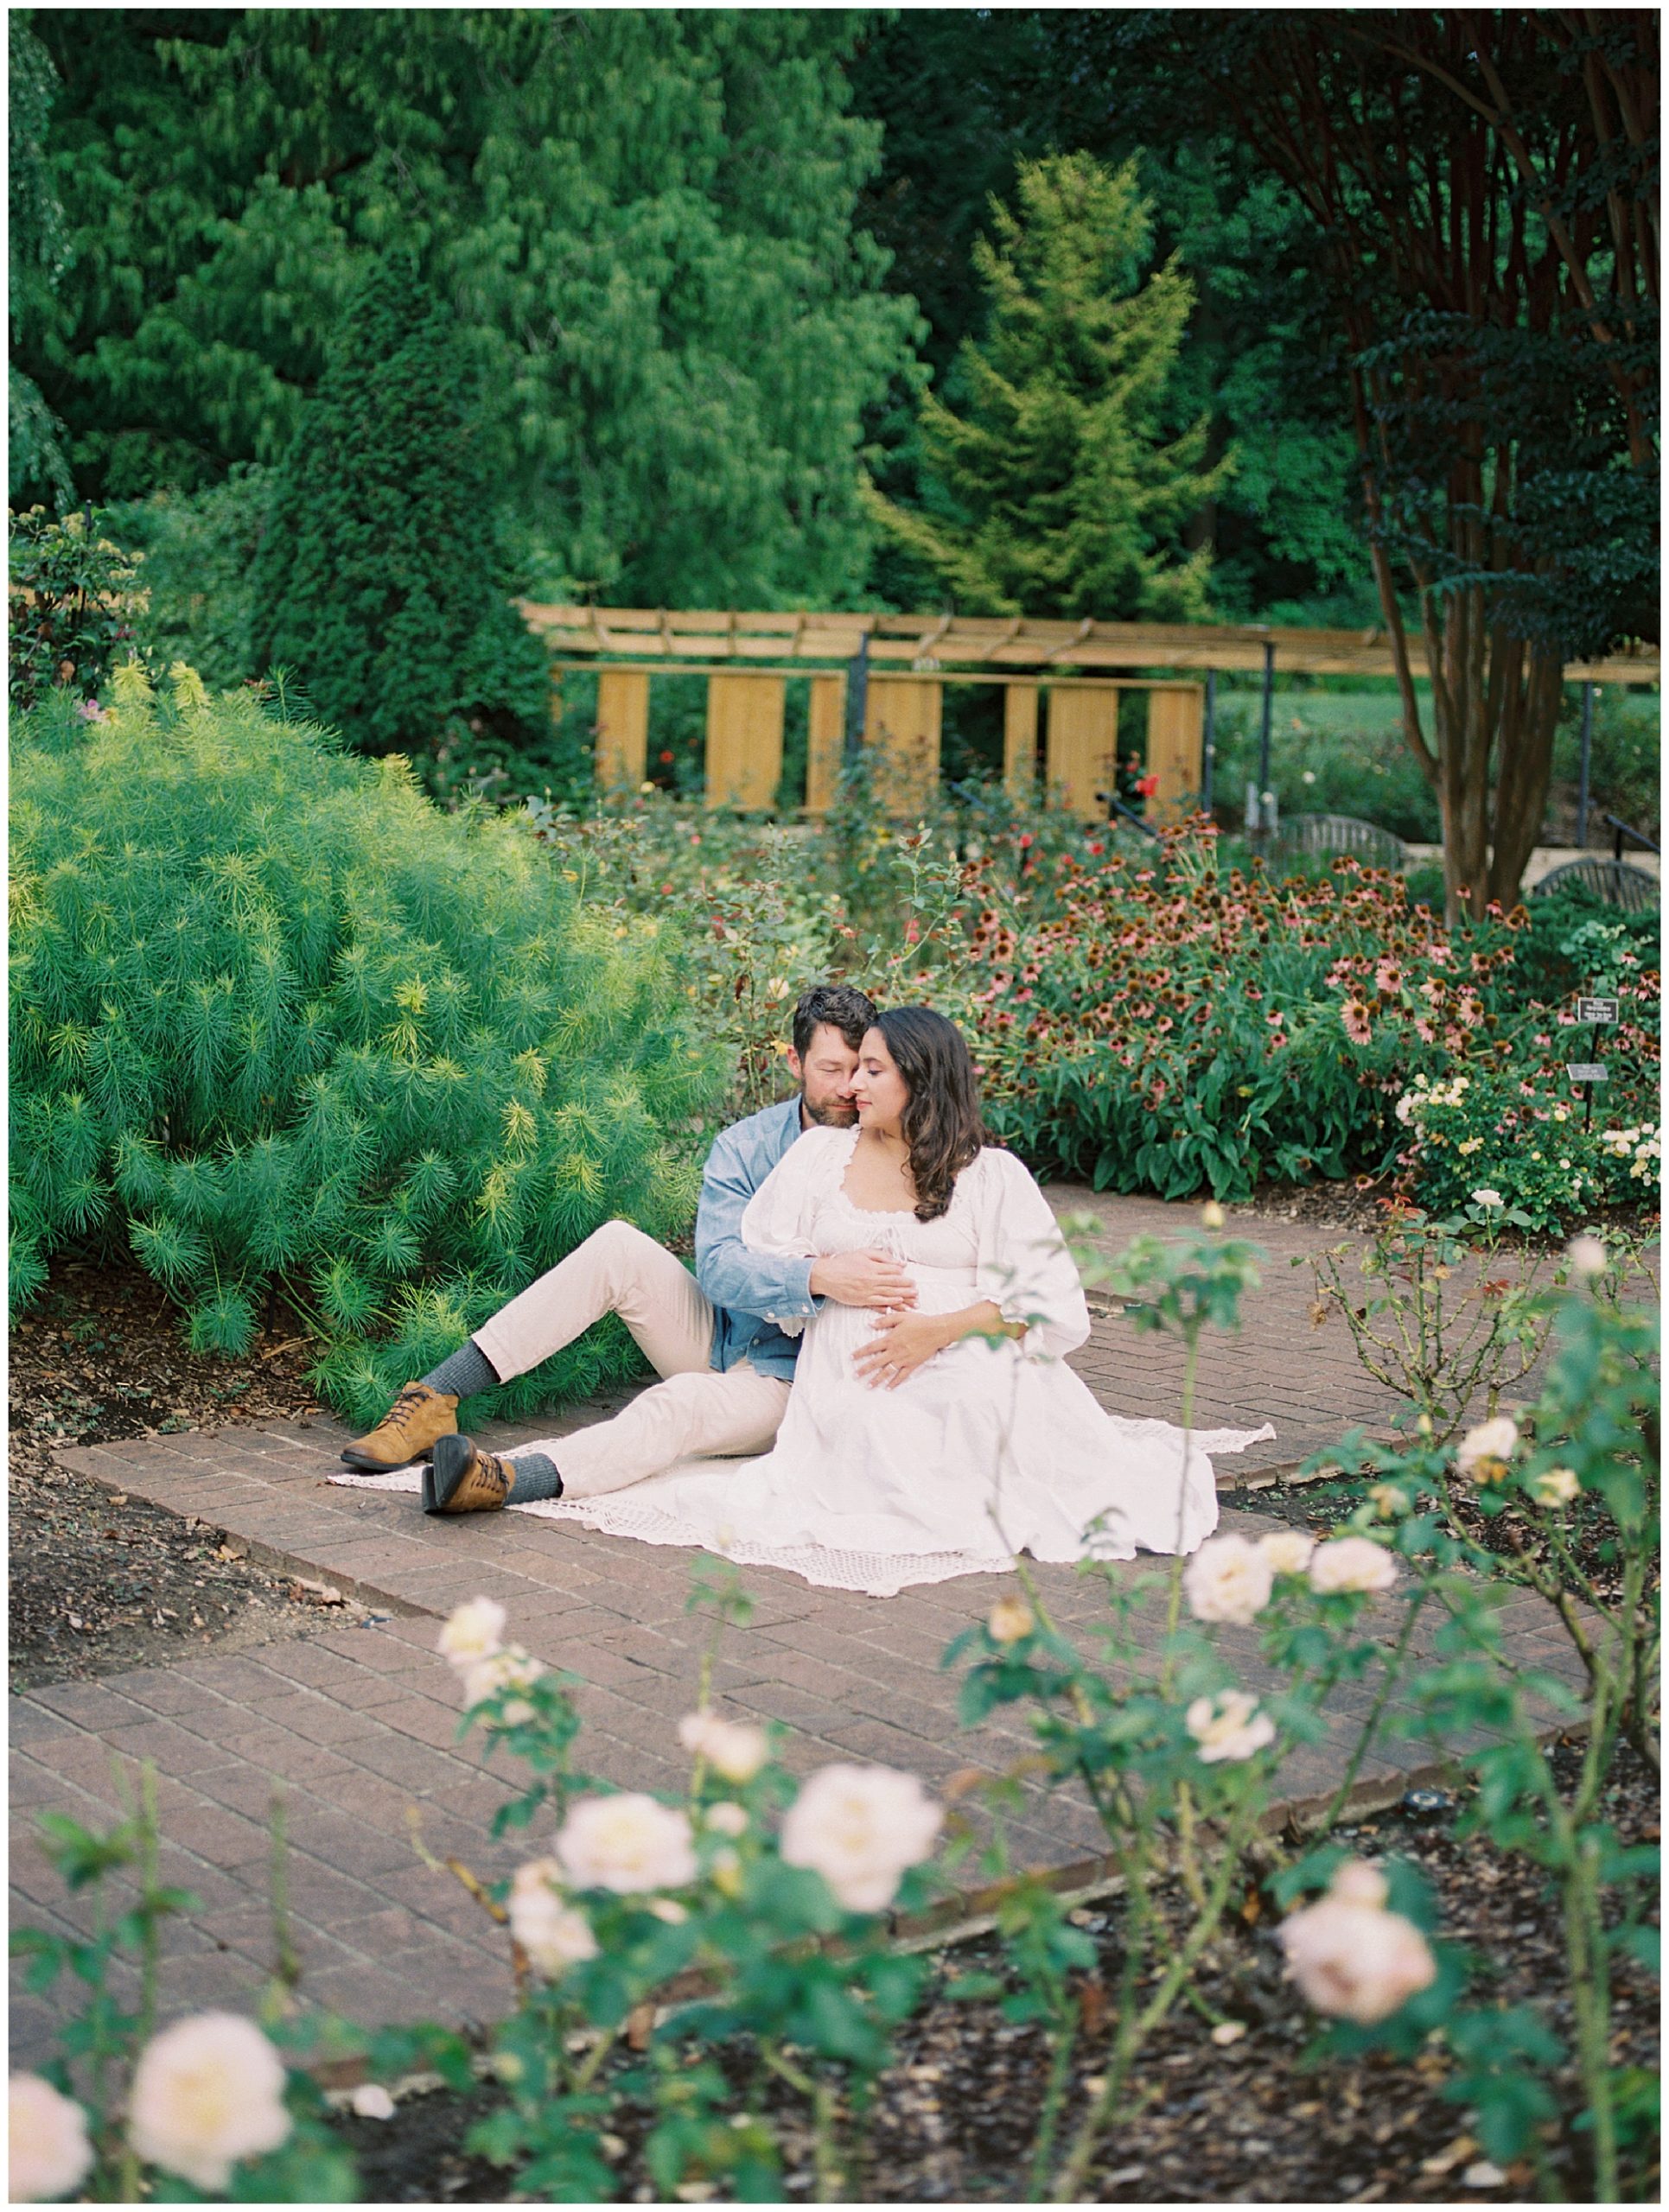 Husband and wife sit in the middle of a garden, embracing during their floral maternity session at Brookside Gardens.